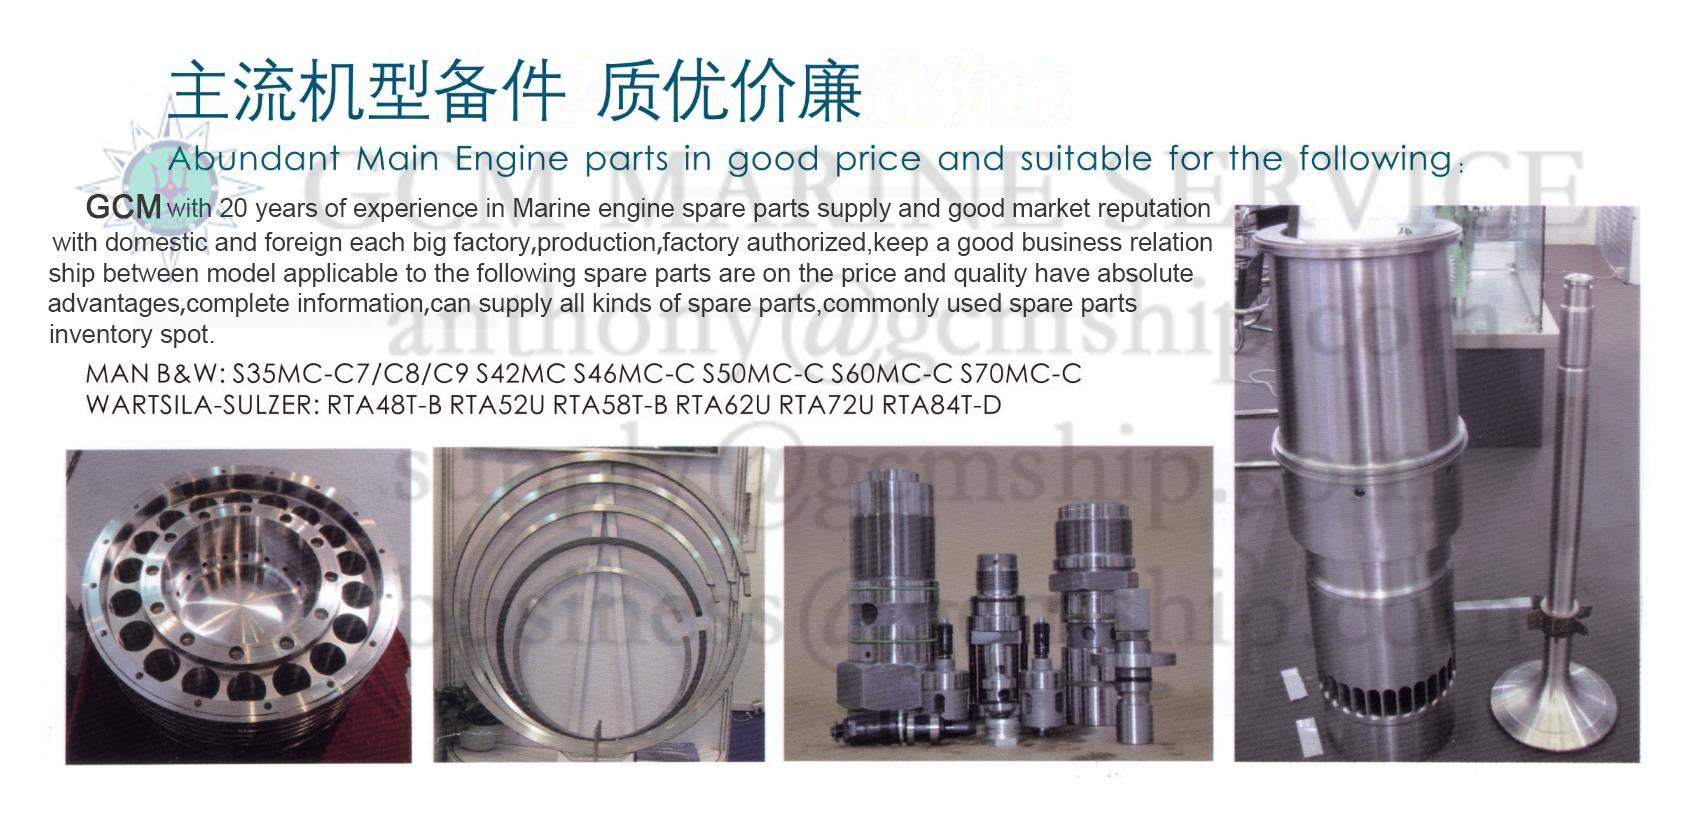 Introduction to Mainstream machine spare parts(图1)